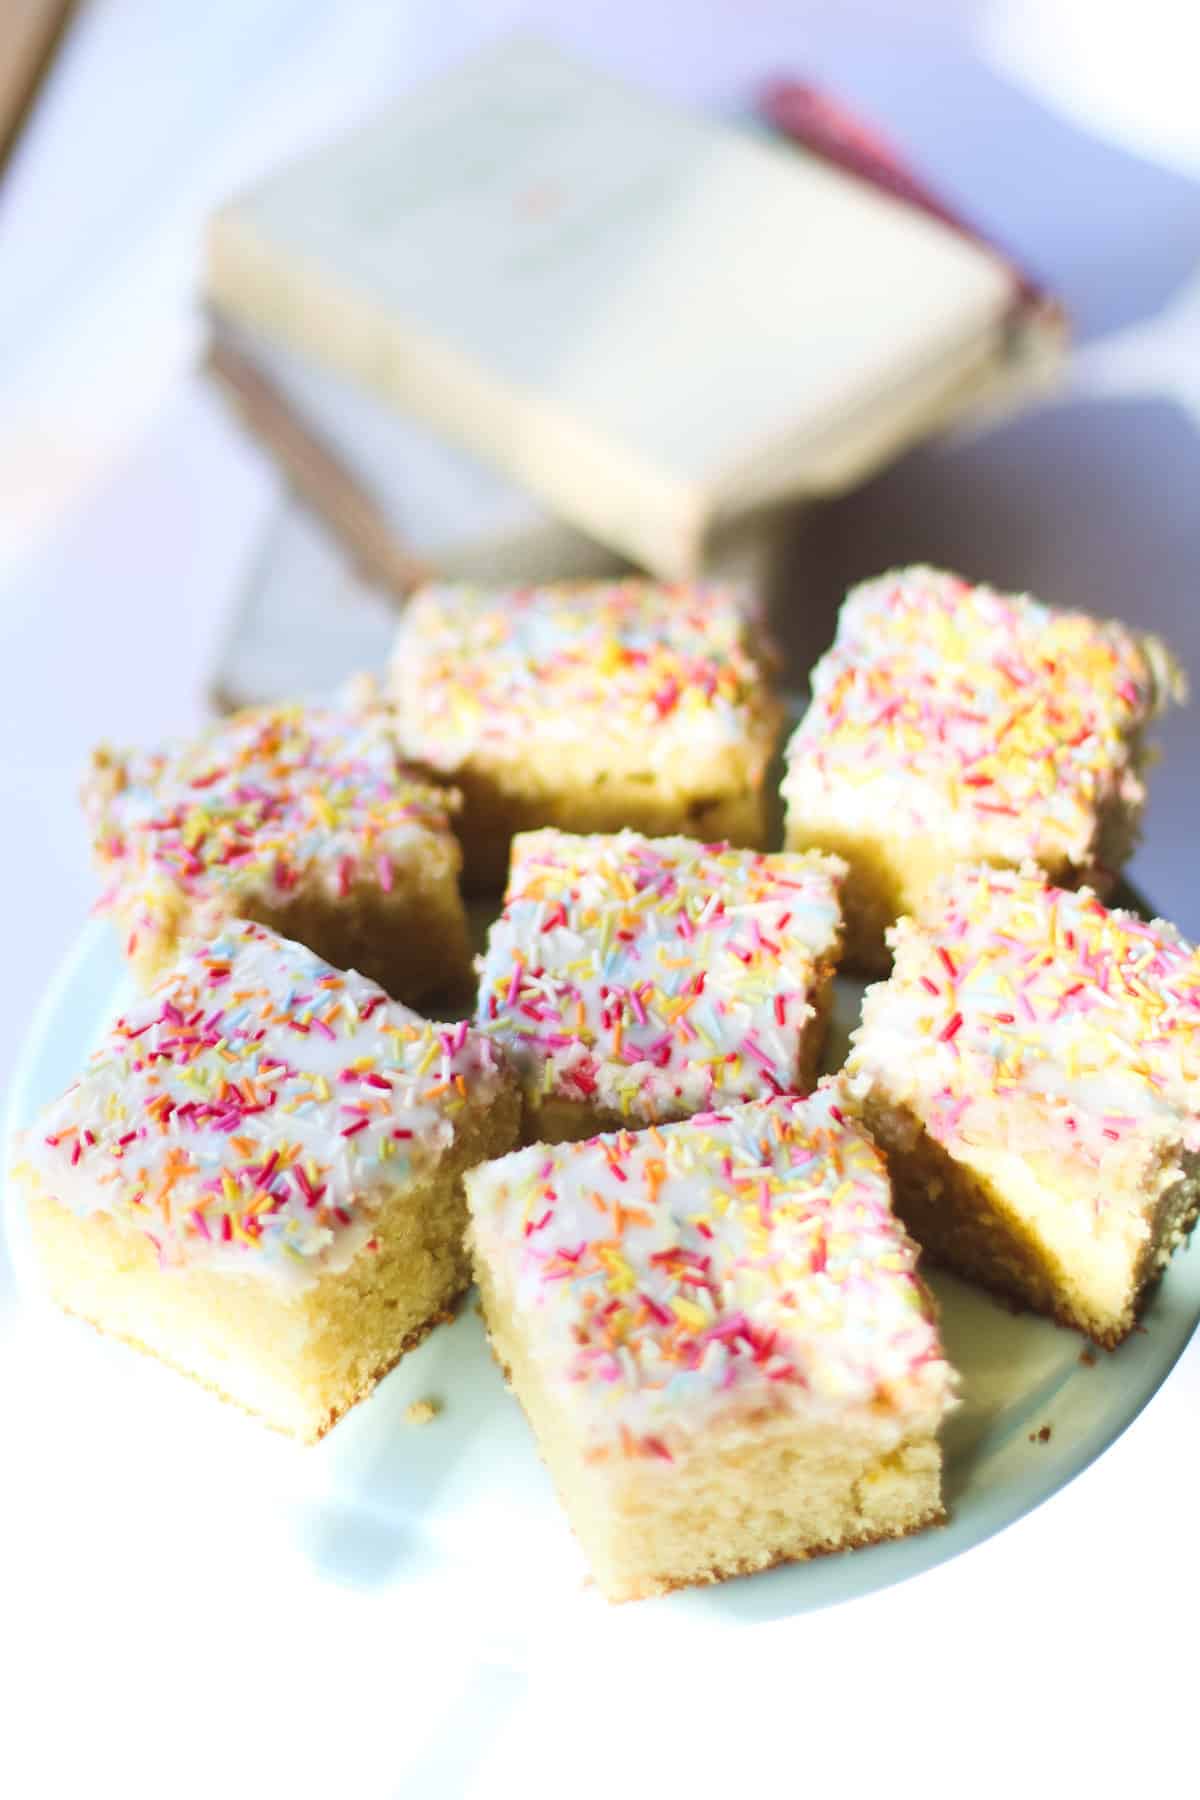 Easy Old Fashioned School Cake Recipe (Sprinkle Tray Bake) by Cherry Menlove